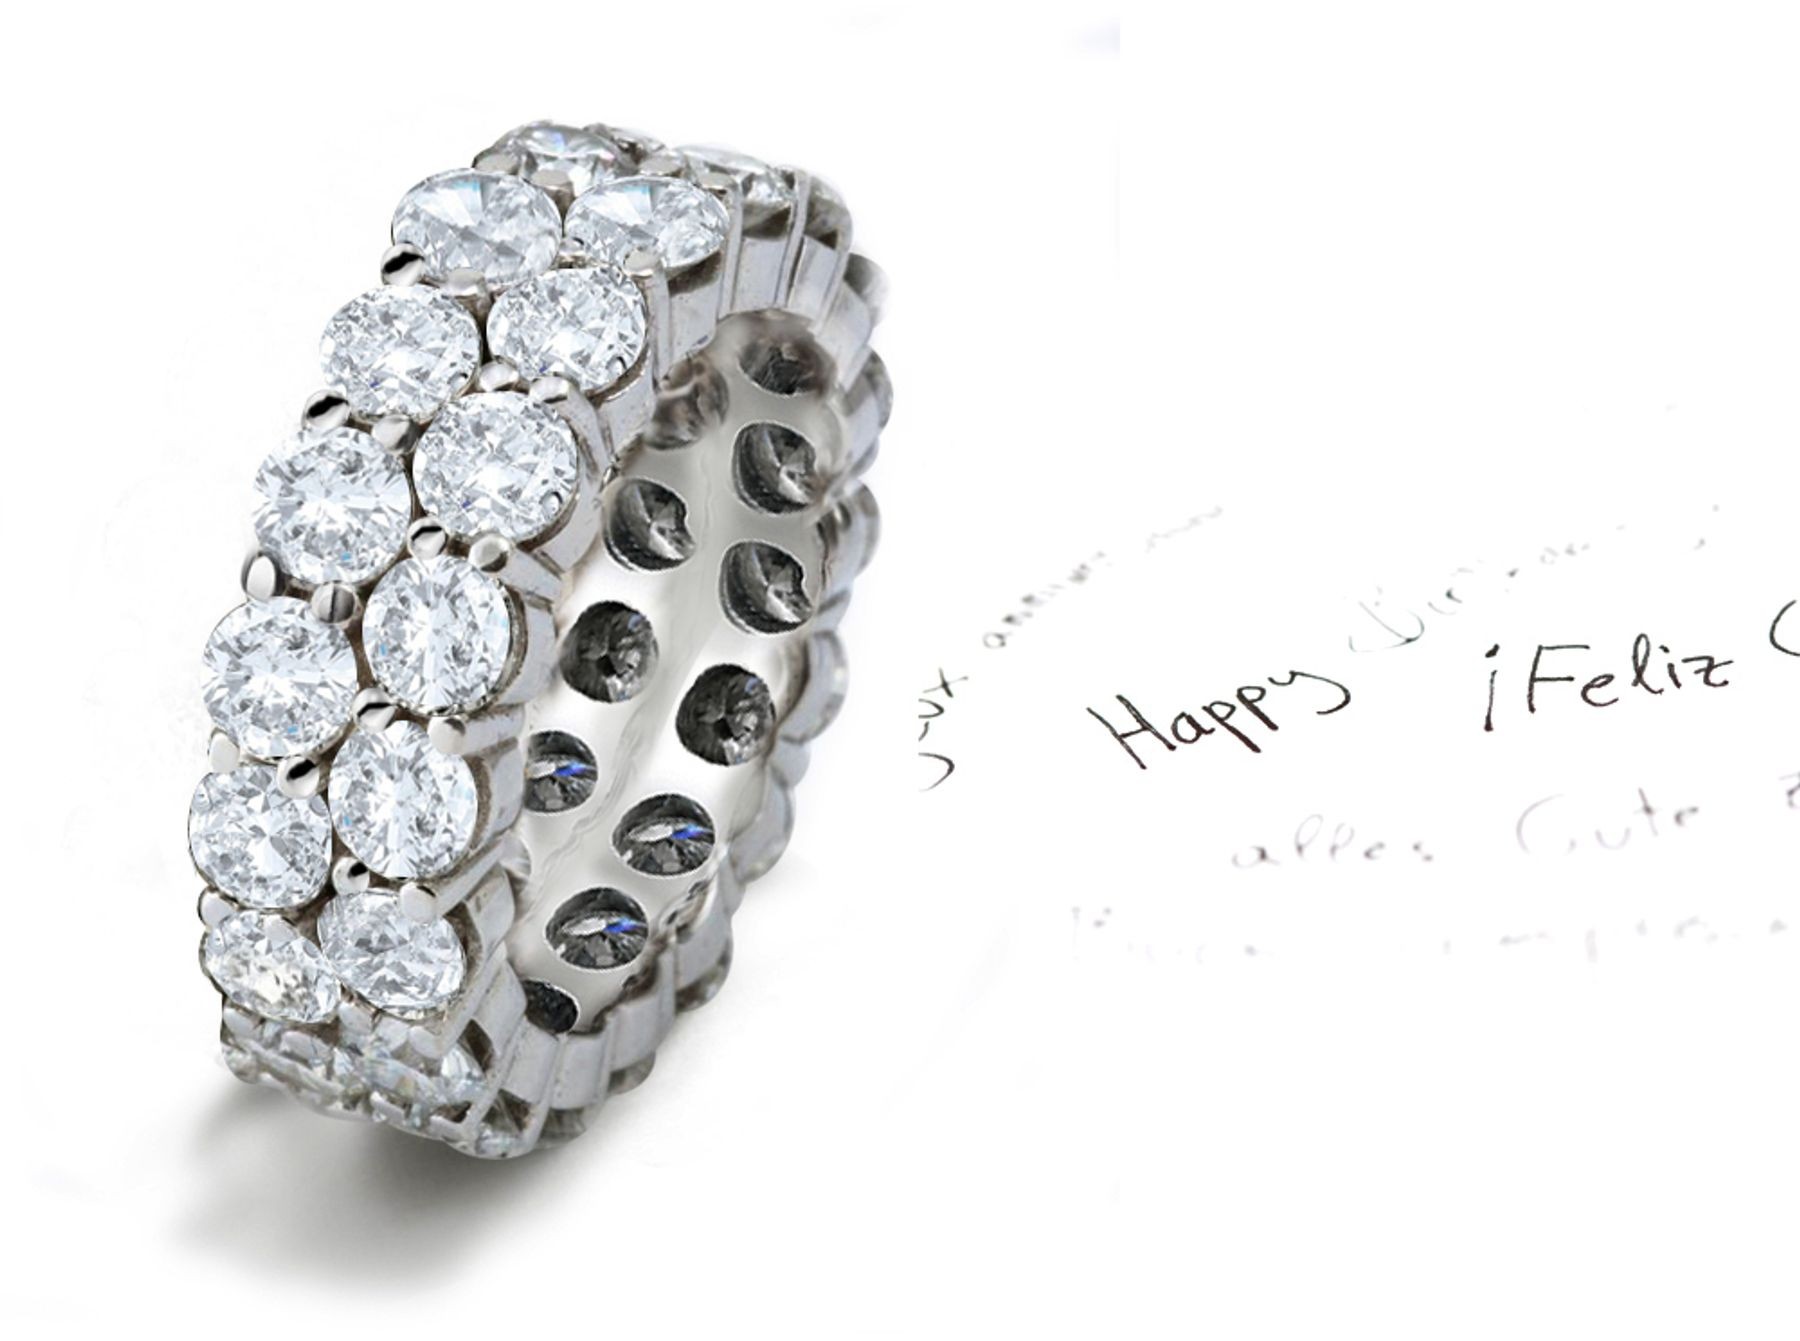 Impeccable: View Glittering Double Row Round Diamond Eternity Ring in Polished Platinum 2 mm High